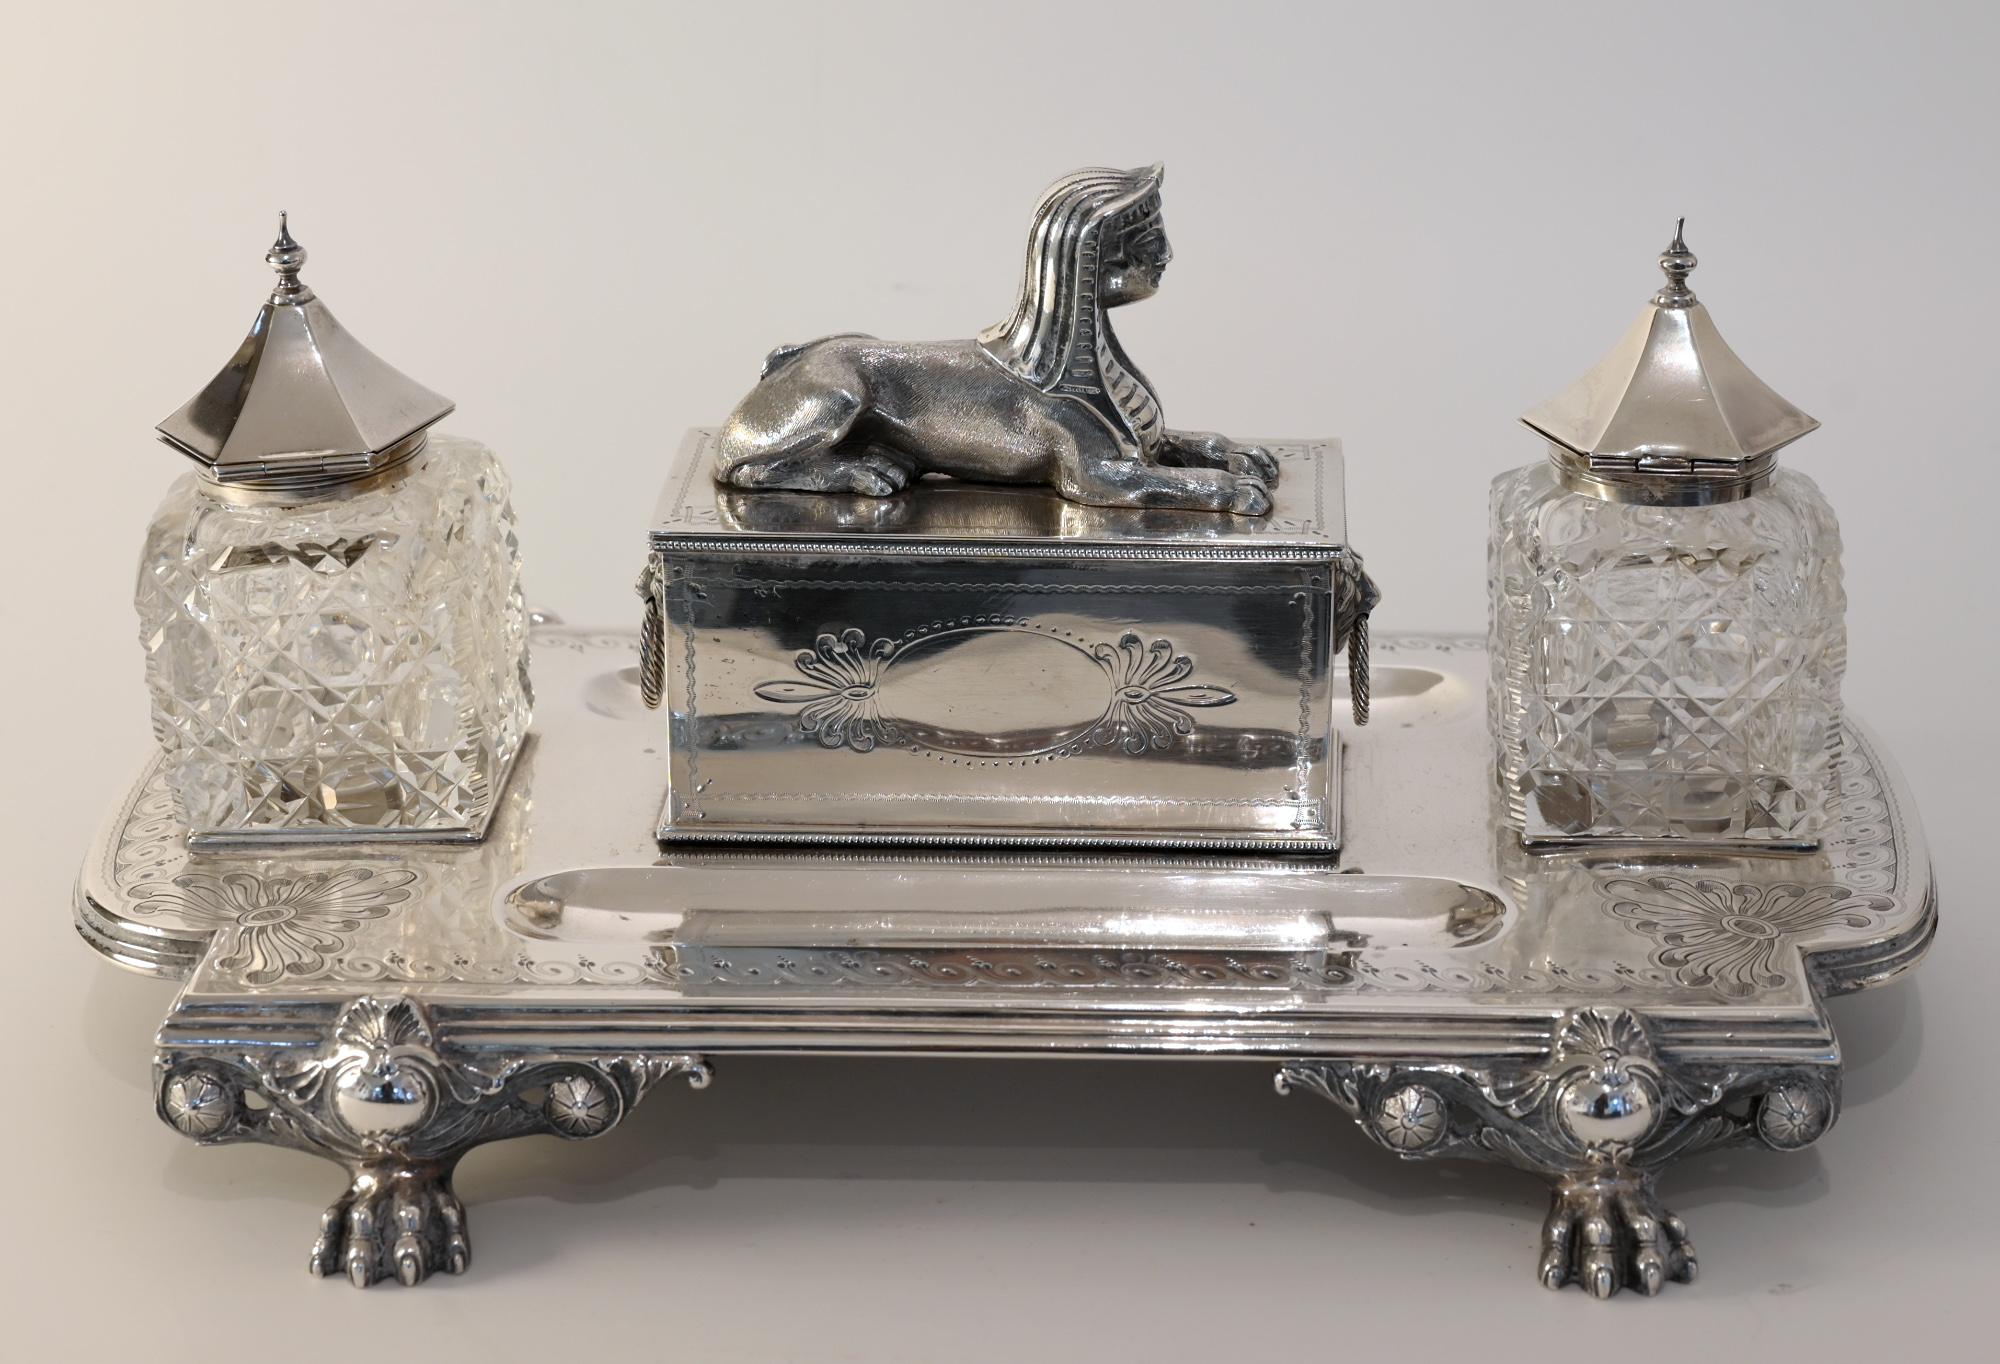 This beautiful writing set was made in Sheffield 1882 and is out of 1450gr. Sterling silver. The maker's mark is JBB. The two inkwells are made out of cut crystal glass.